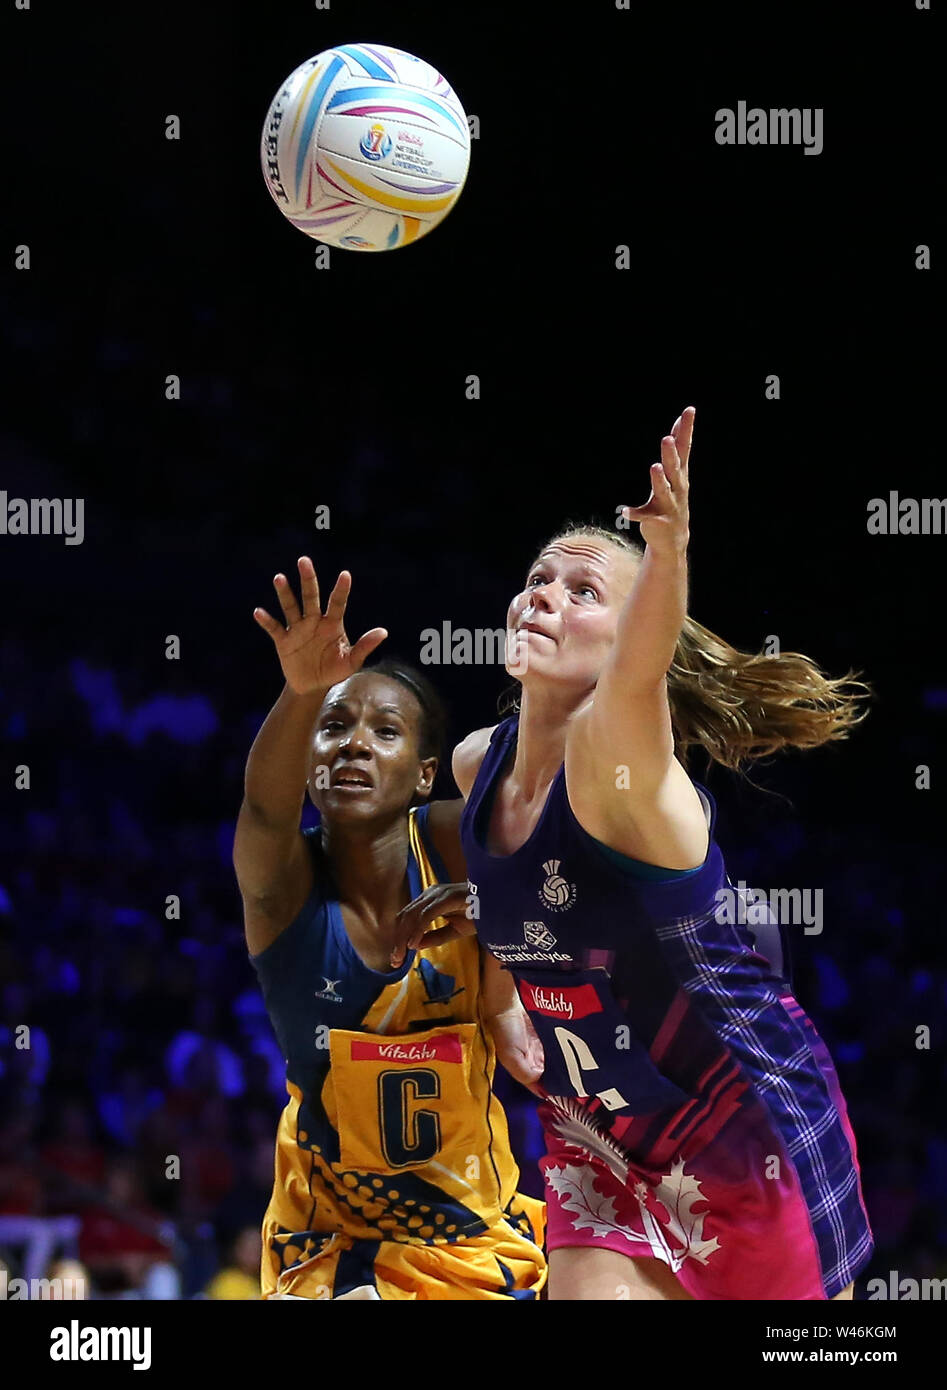 Barbados' Tonisha Rock-Yaw (left) and Scotland's Claire Maxwell battle for the ball during the Netball World Cup match at the M&S Bank Arena, Liverpool. Stock Photo